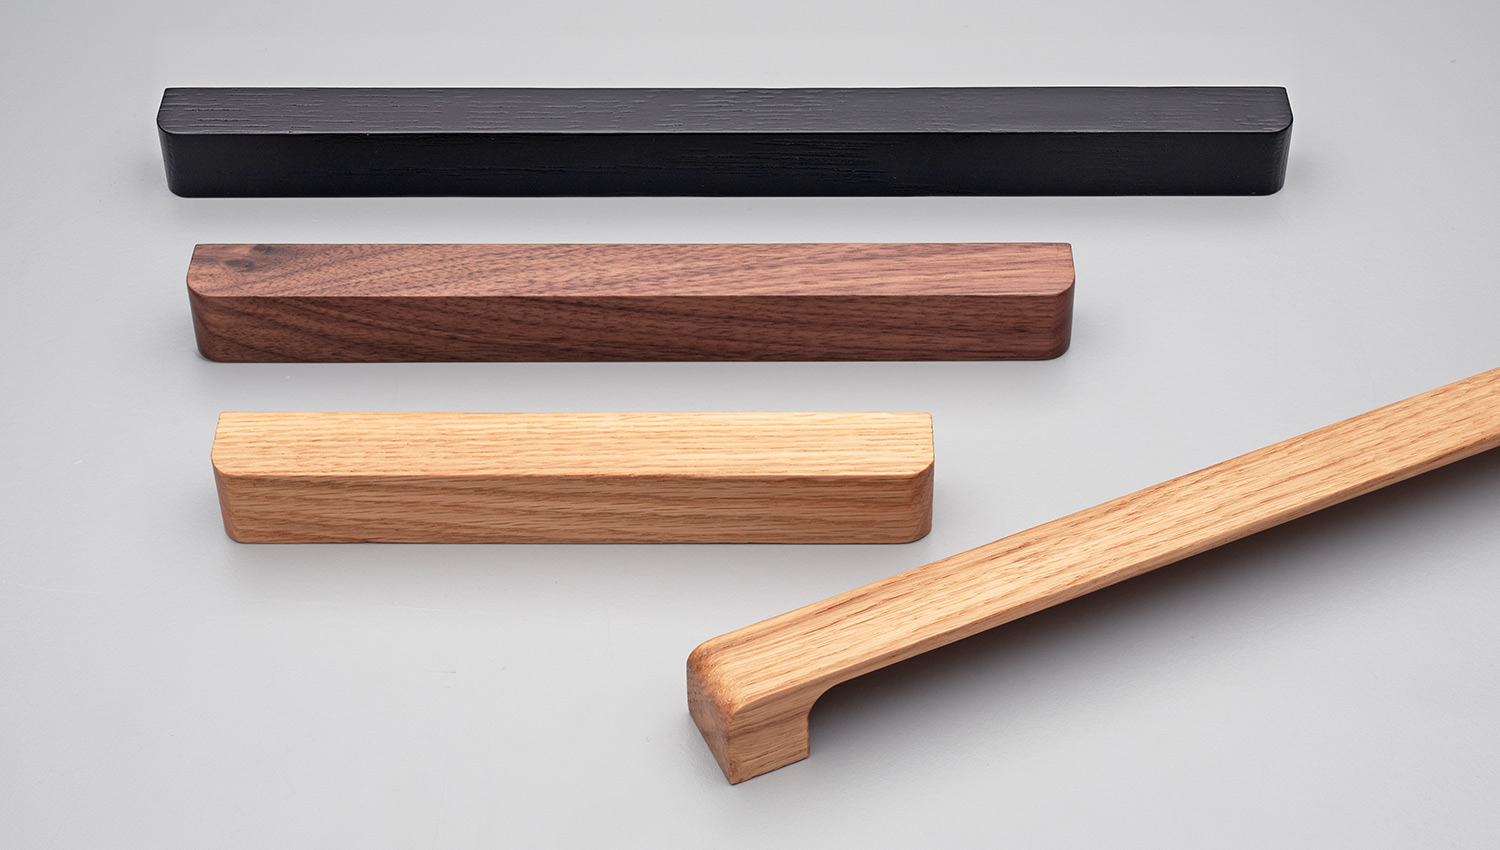 Timber Handles for Cabinetry and Drawers, Kethy